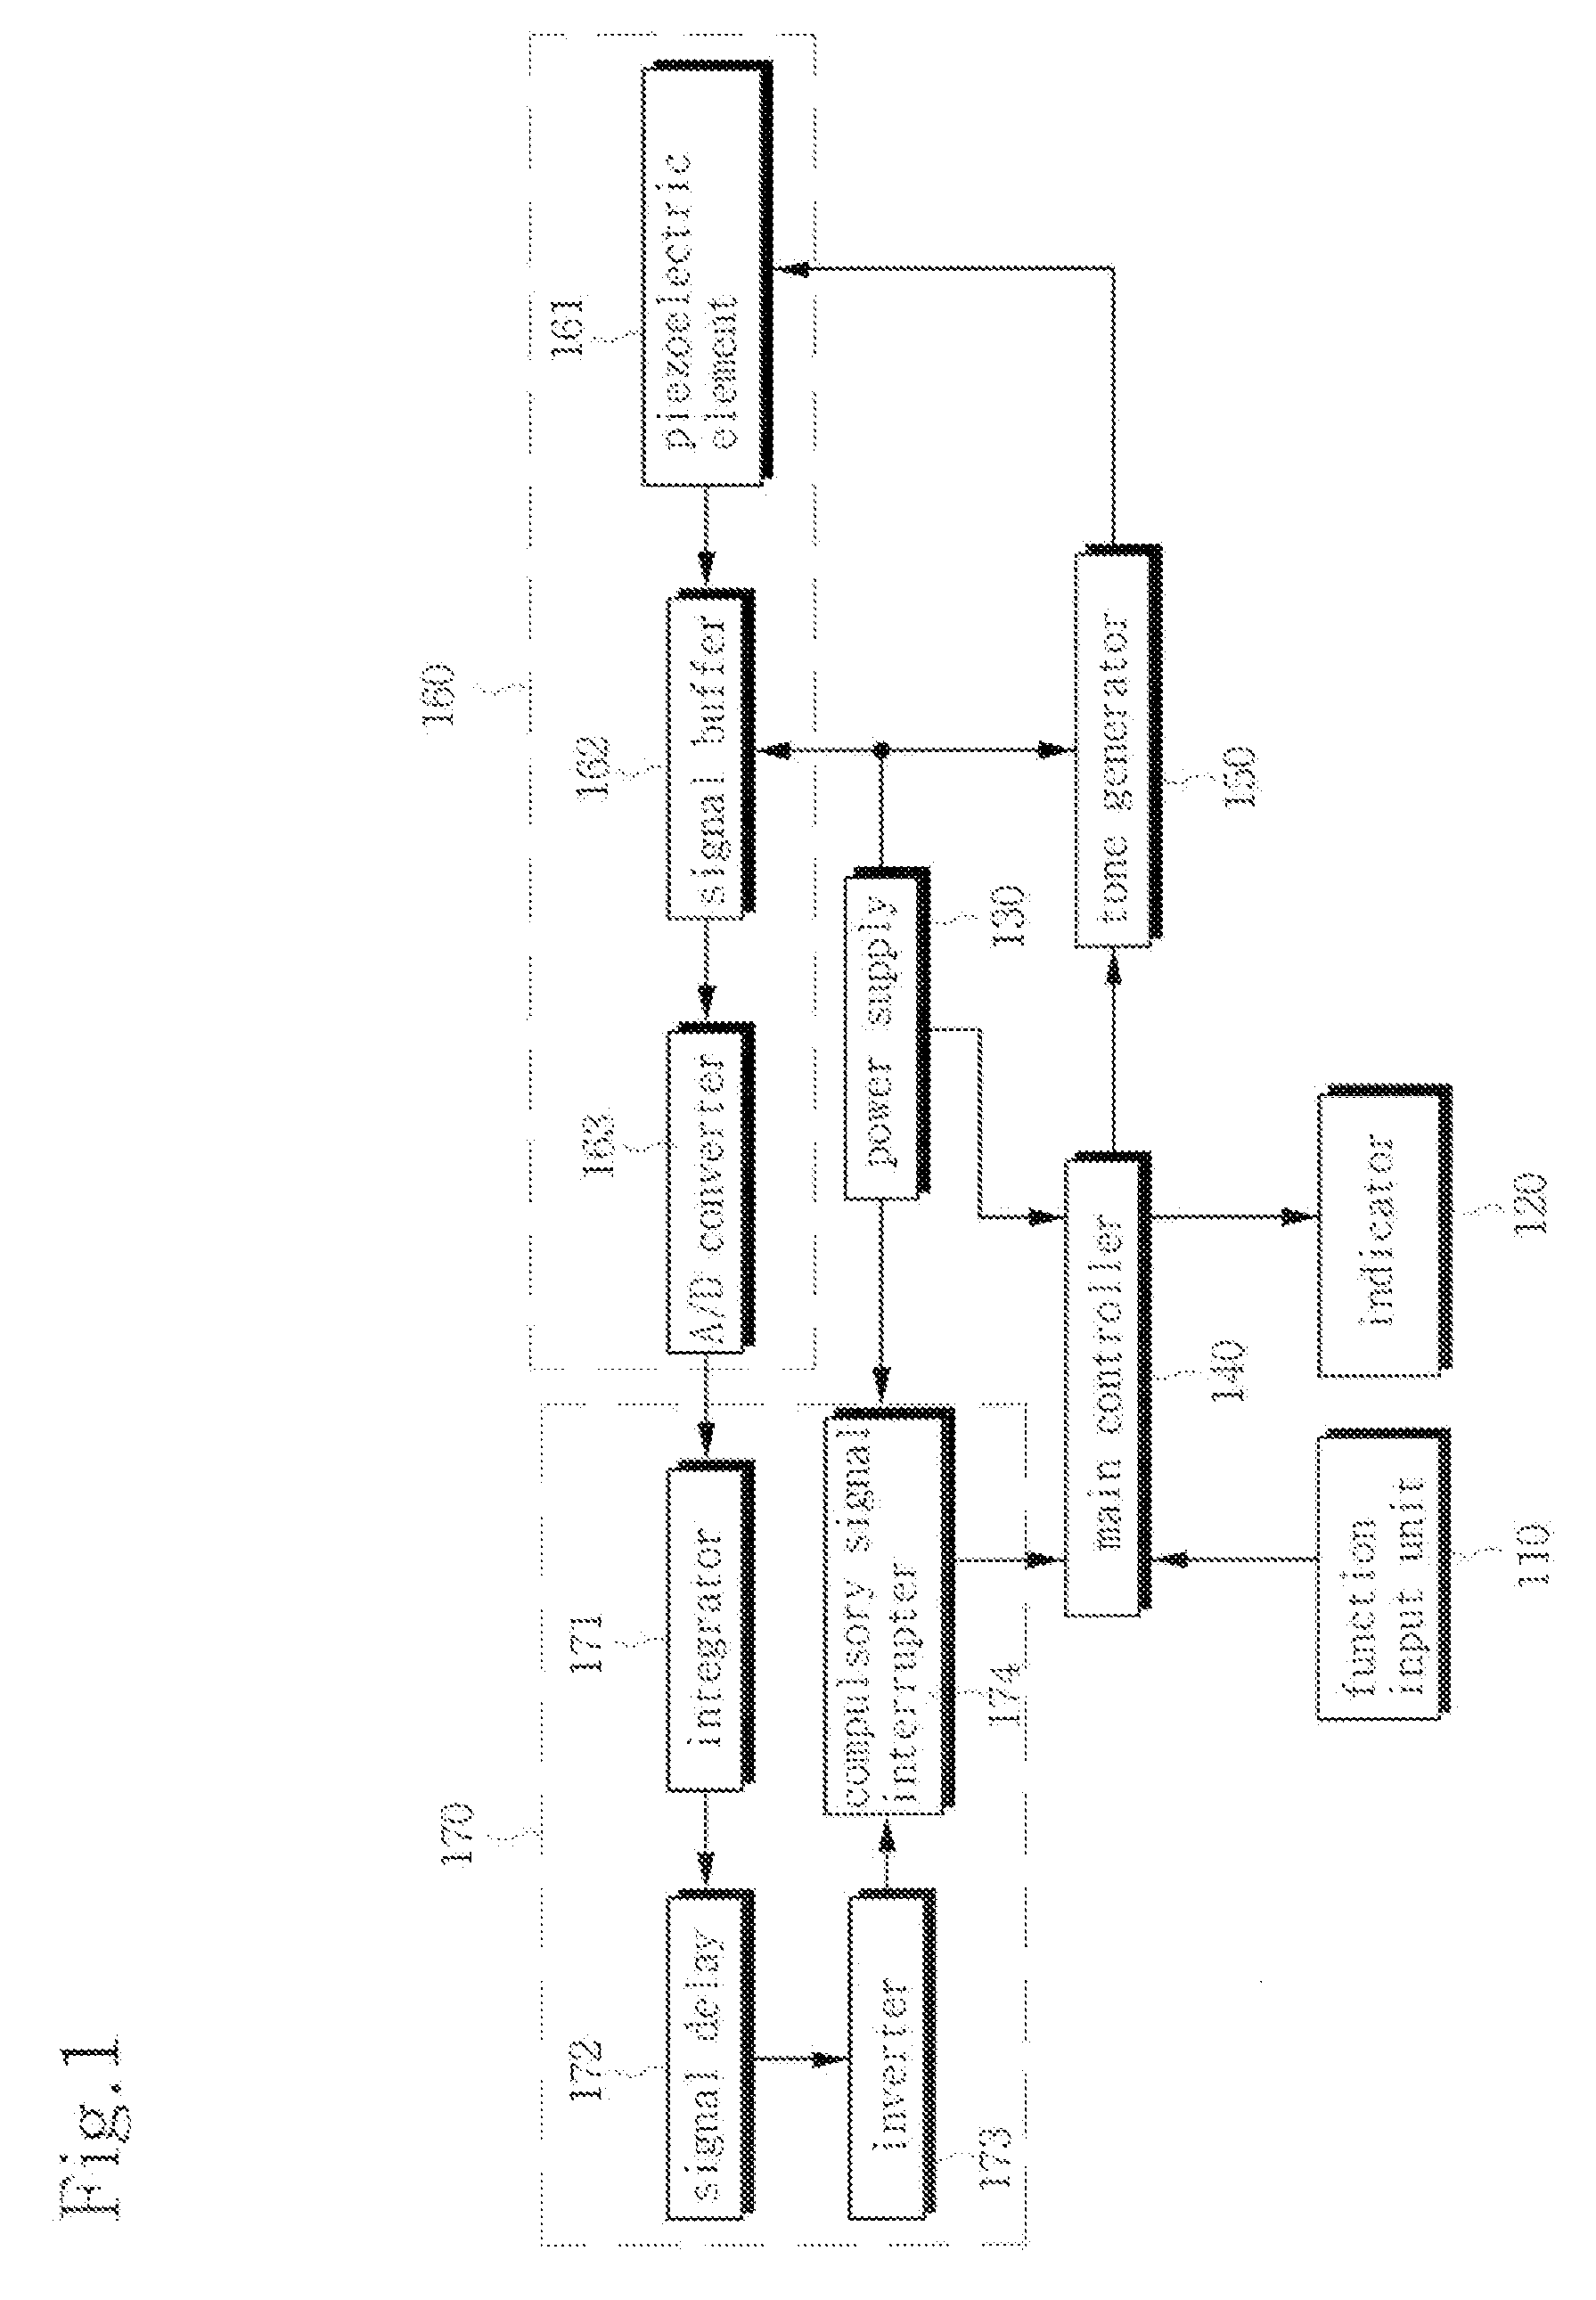 Apparatus and method for locating missing article